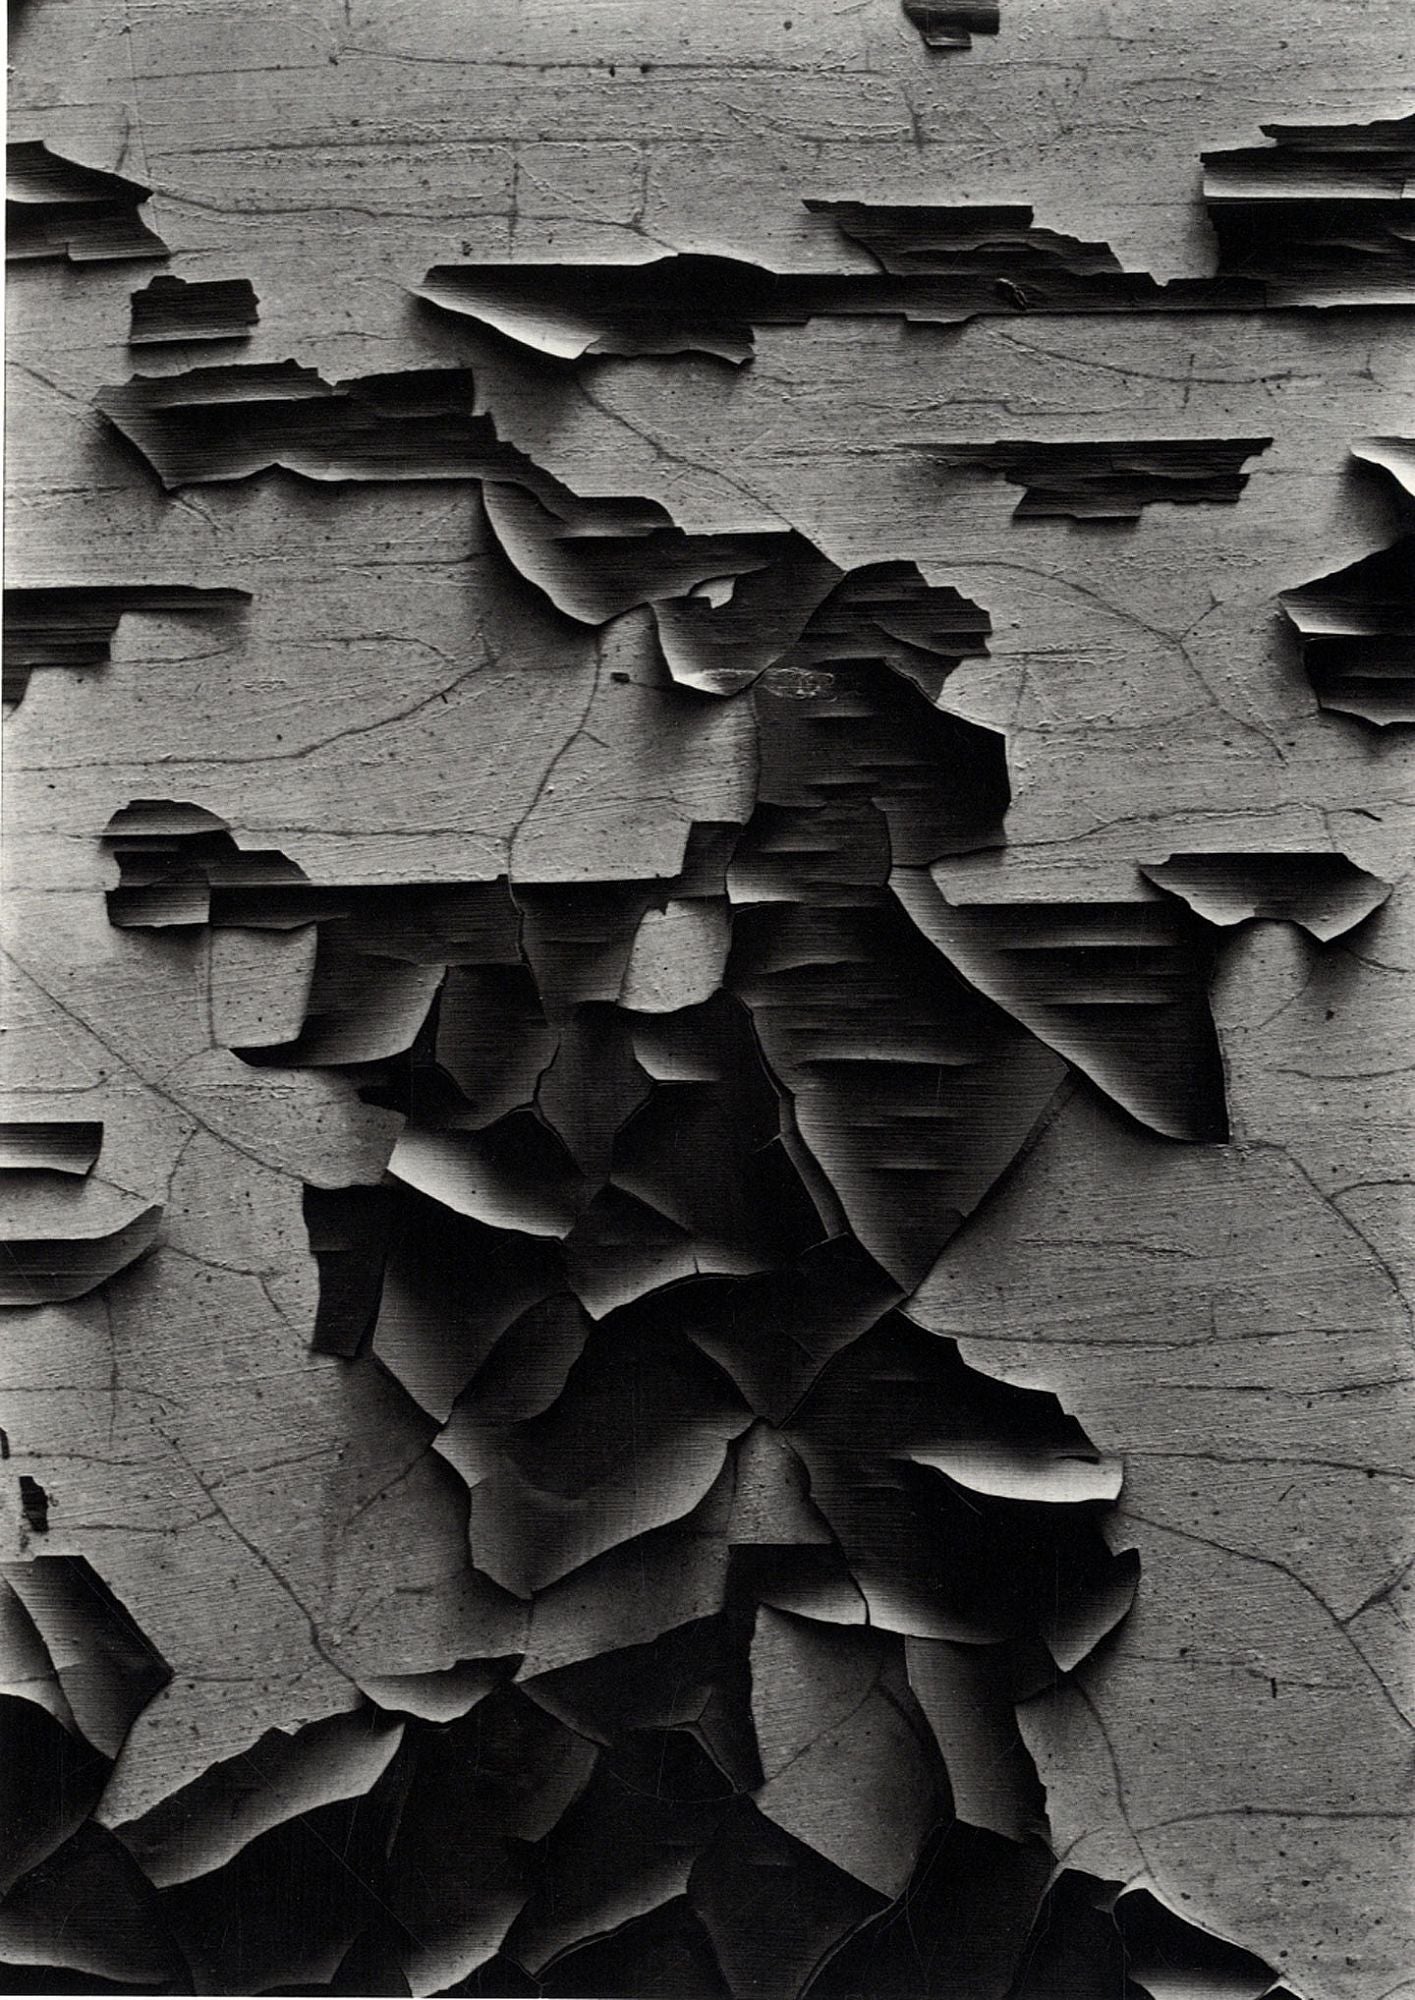 Aaron Siskind: Pleasures and Terrors [SIGNED (for members of The Presidents Club of the University of Arizona Foundation)]